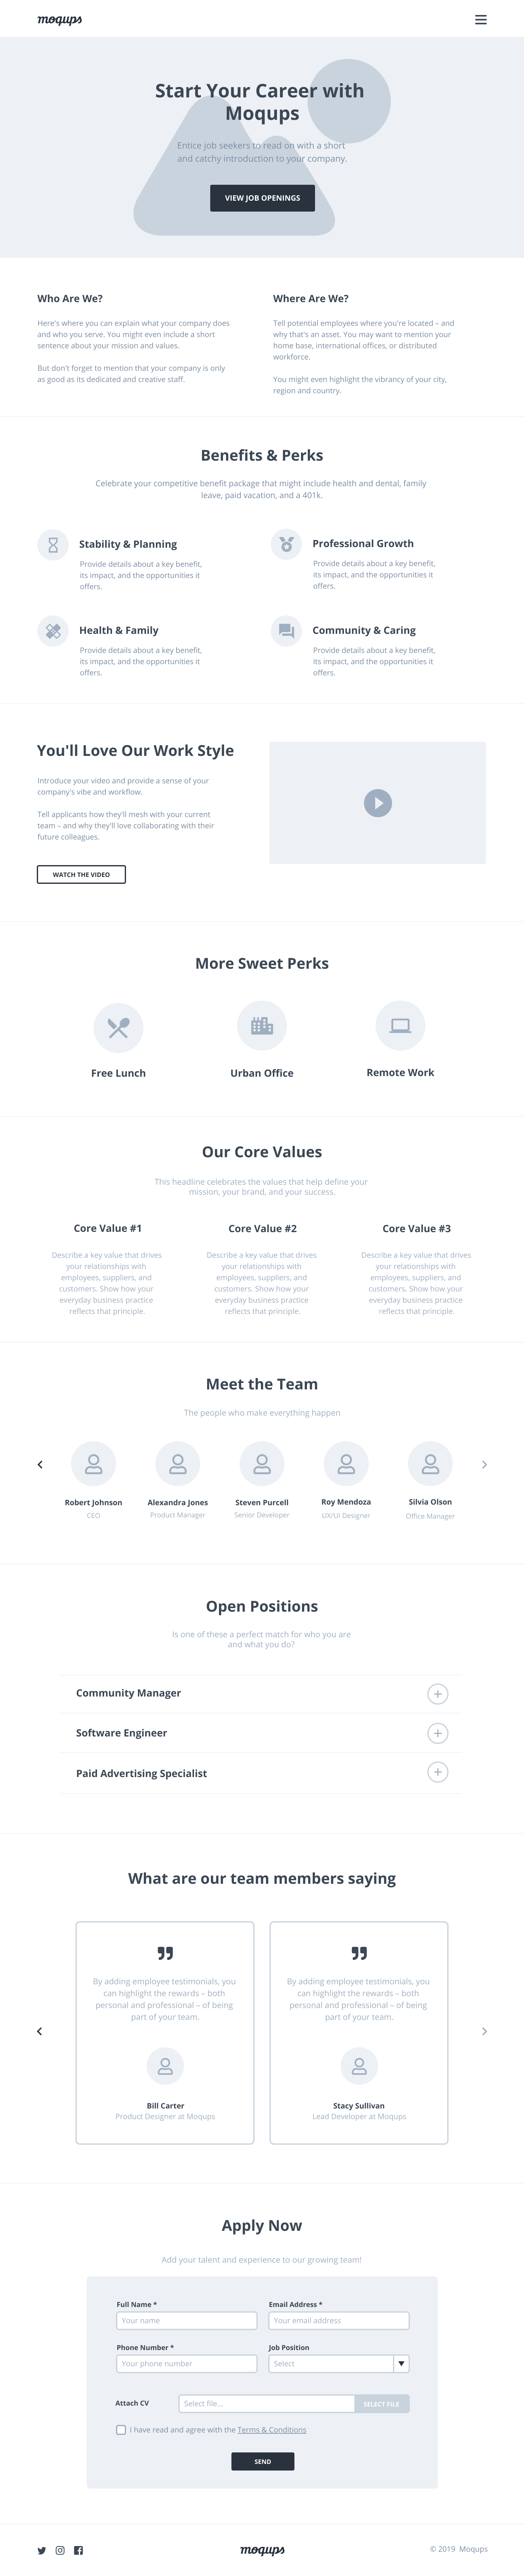 Career Page Wireframe Template